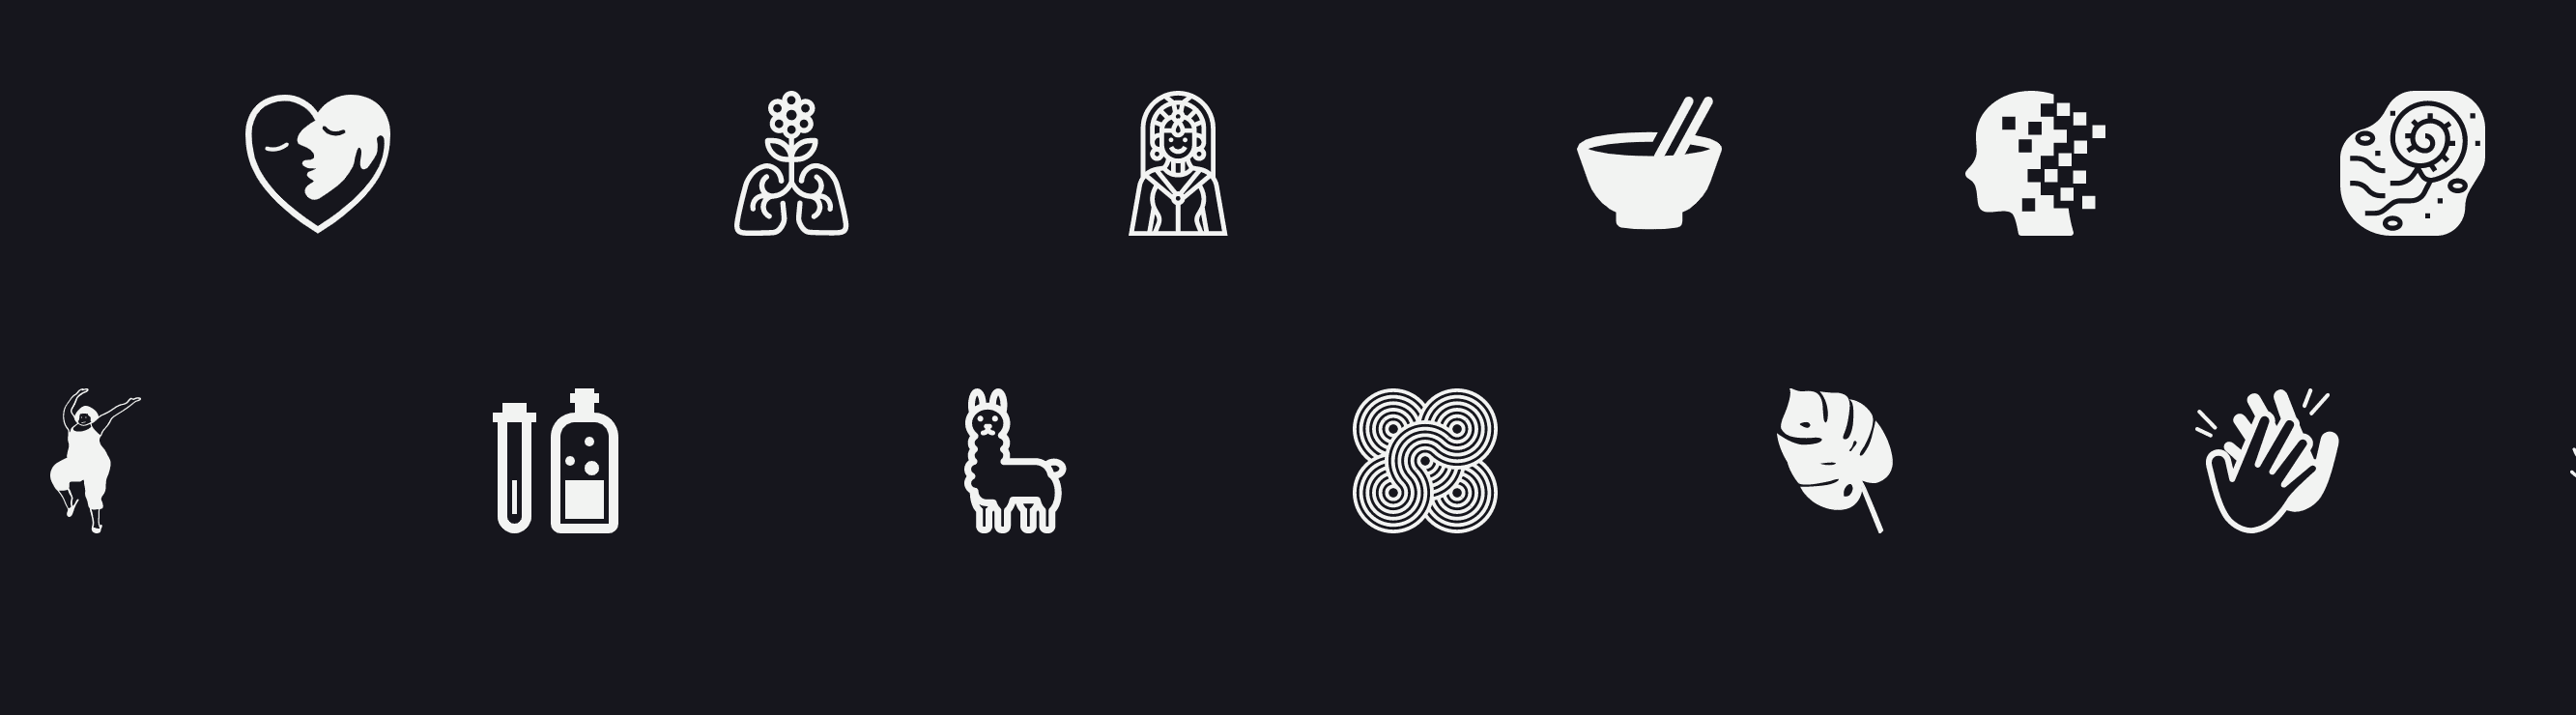 Icons from The Noun Project.